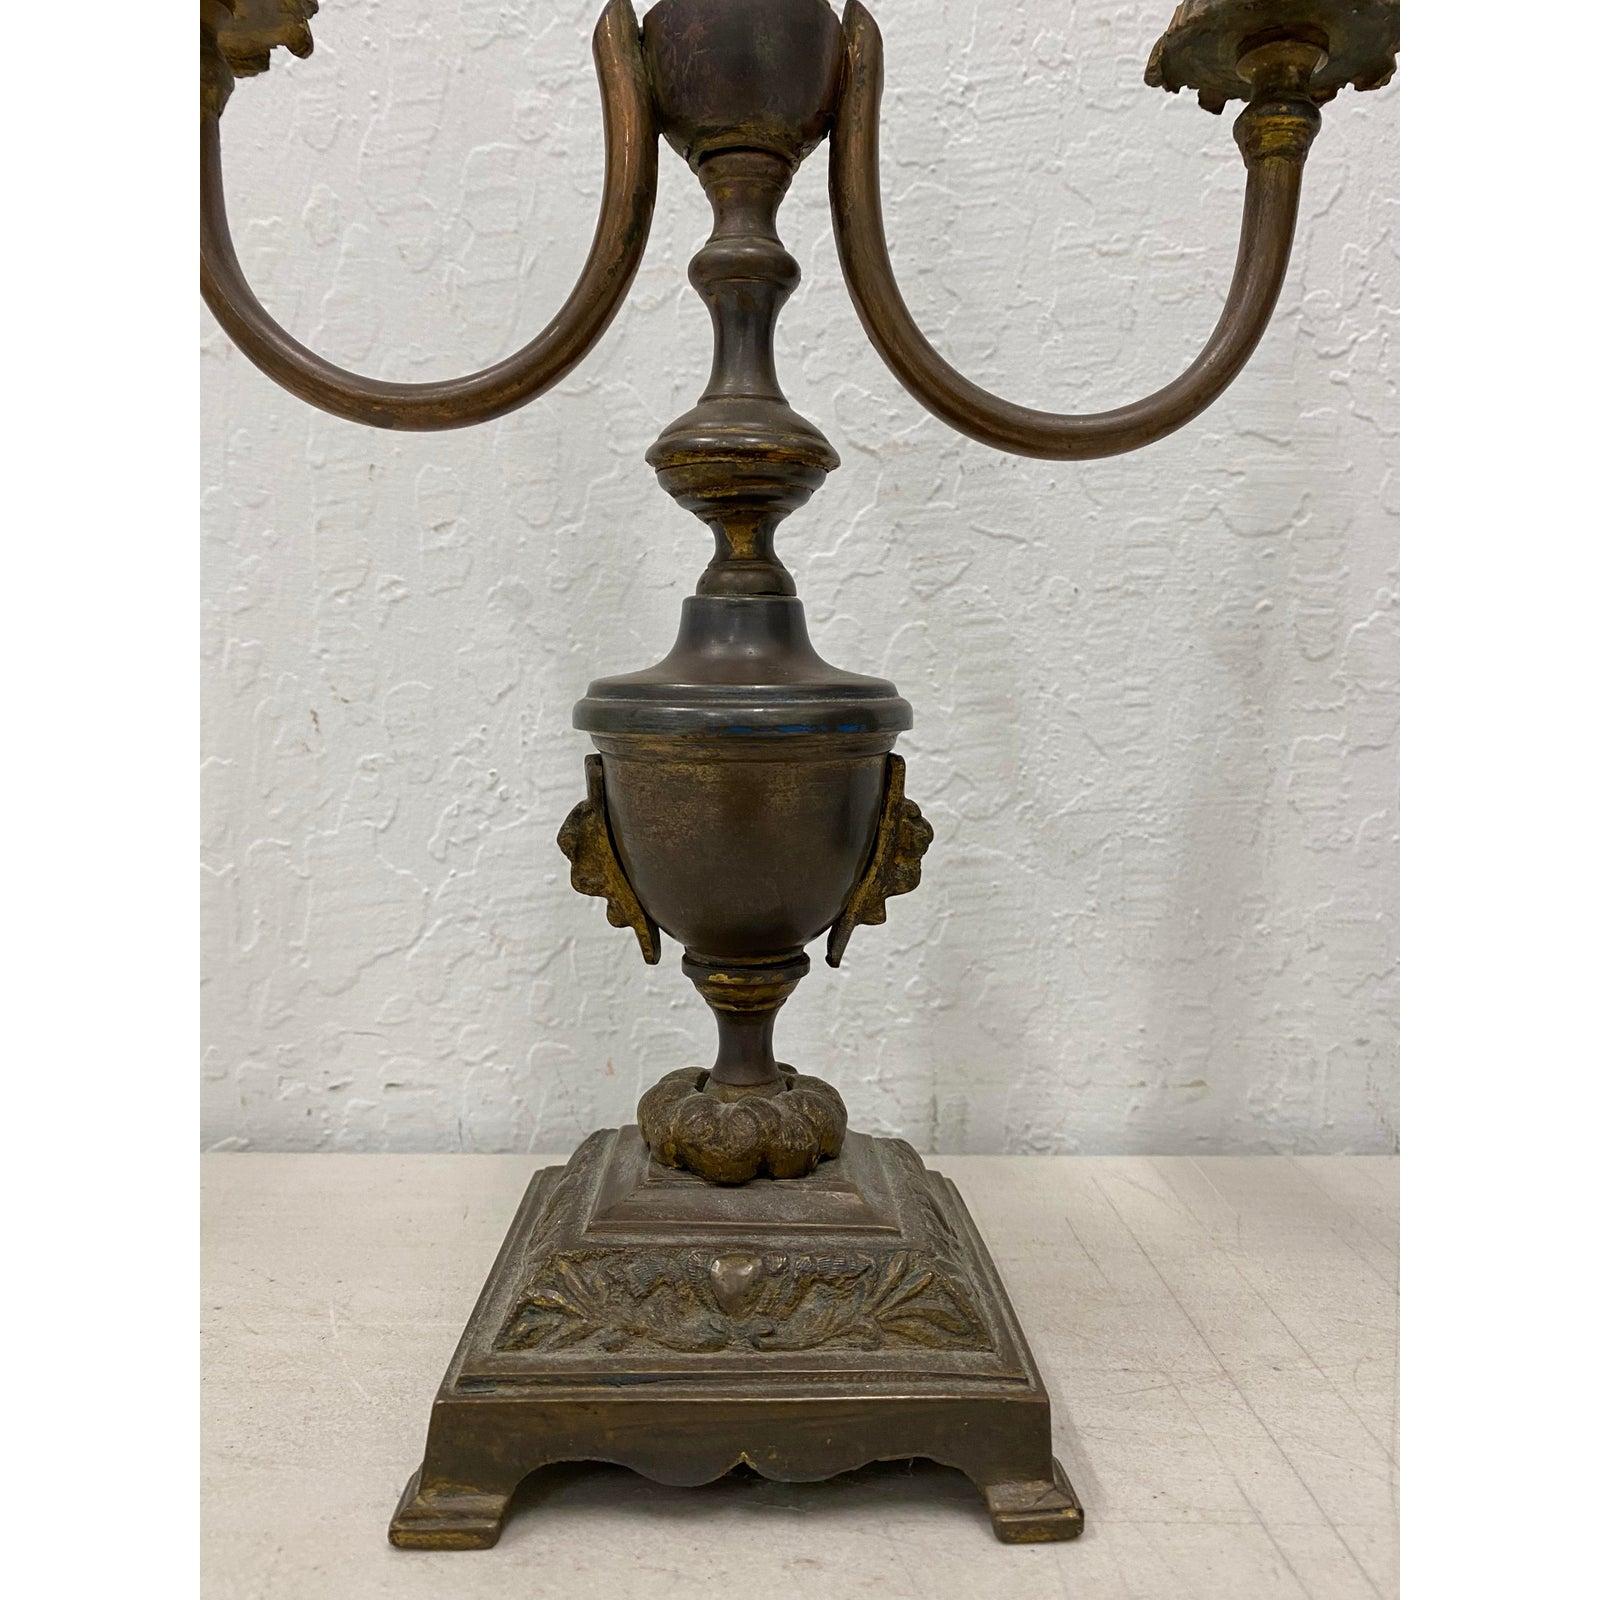 Antique patinated brass classical urn candelabras converted to table lamps

Each is wired for three lights. On / Off switch.

4.5